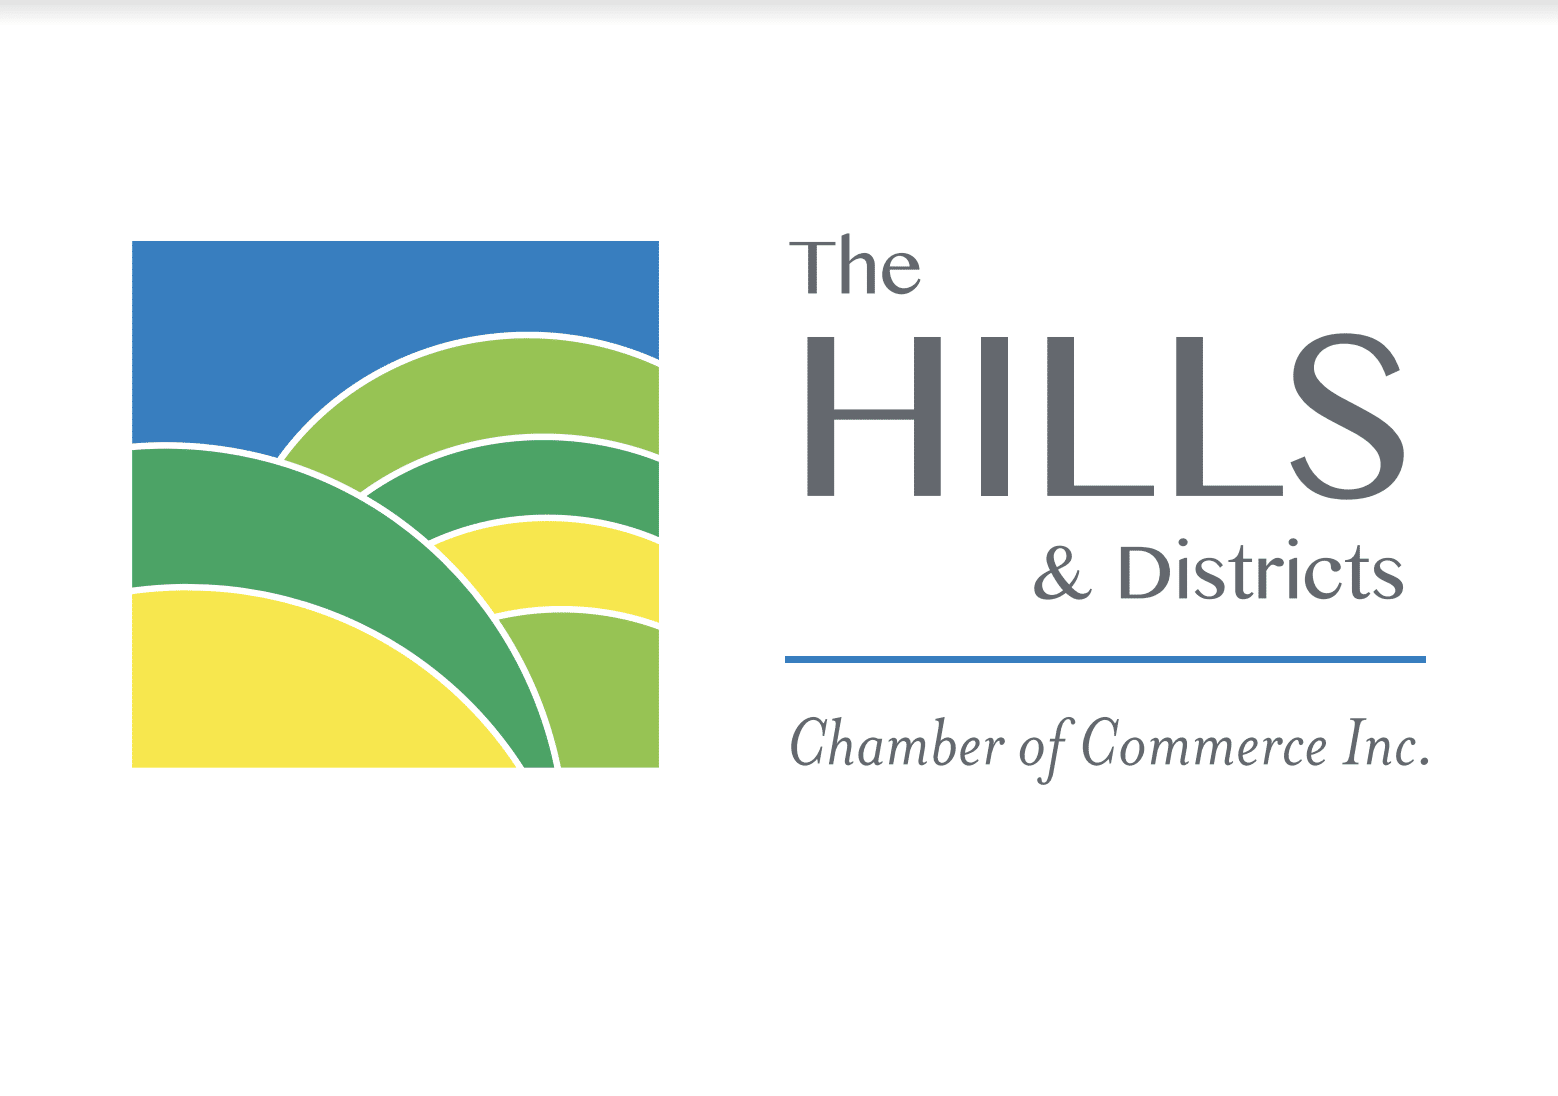 Over The Hills (and still going)  Activities Newsletter